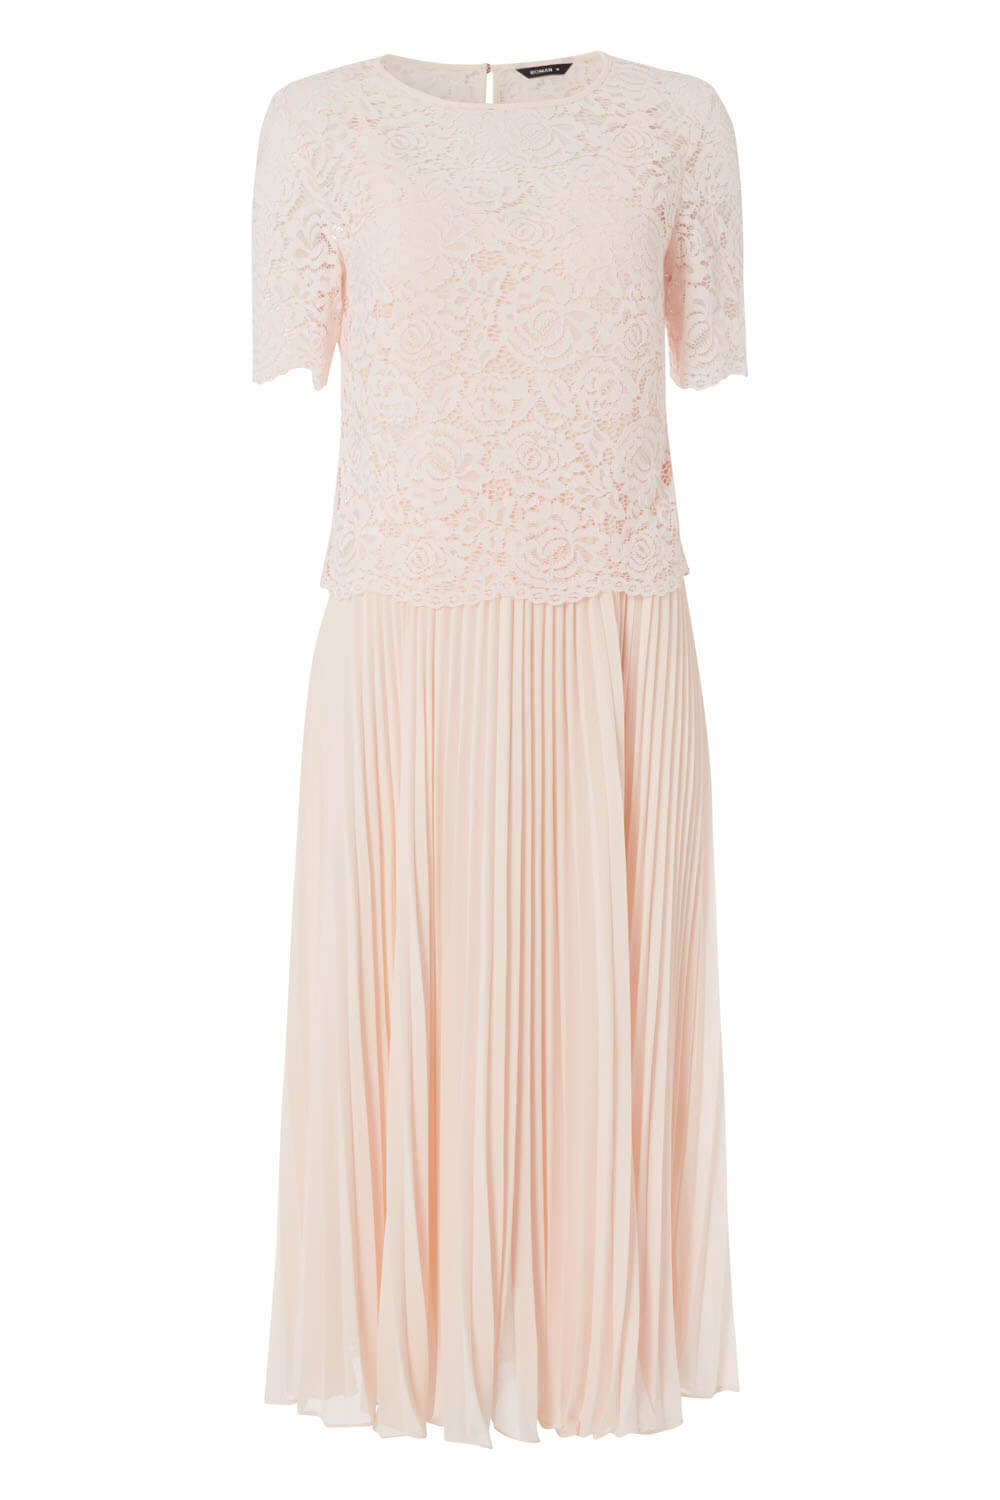 Light Pink Lace Top Overlay Pleated Midi Dress, Image 5 of 5